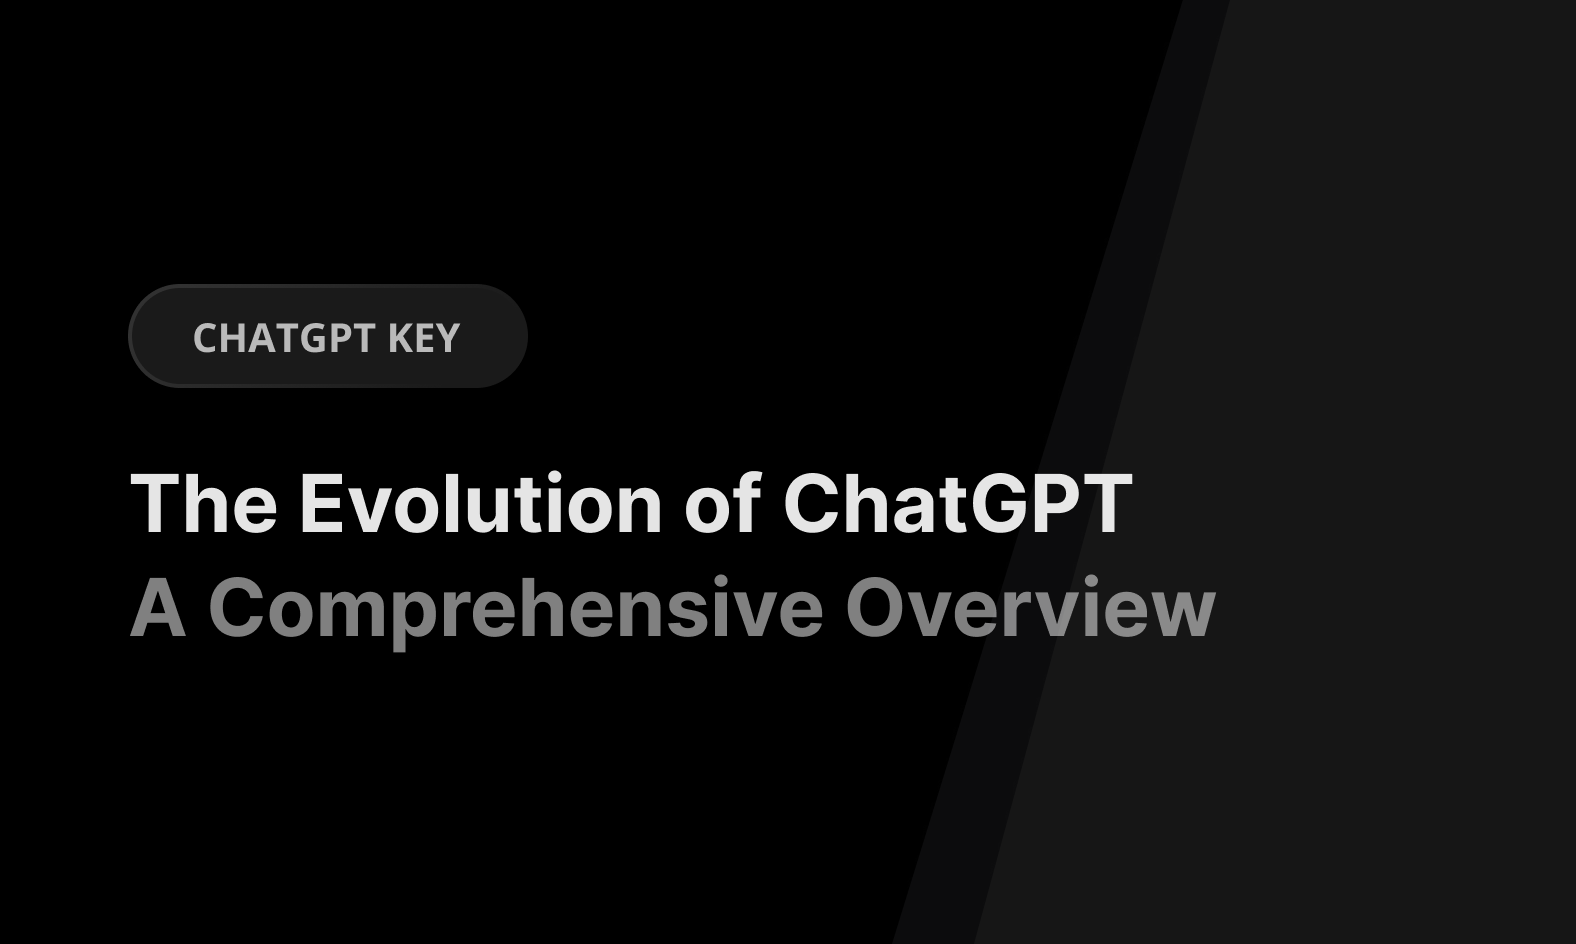 The Evolution of ChatGPT: A Comprehensive Overview